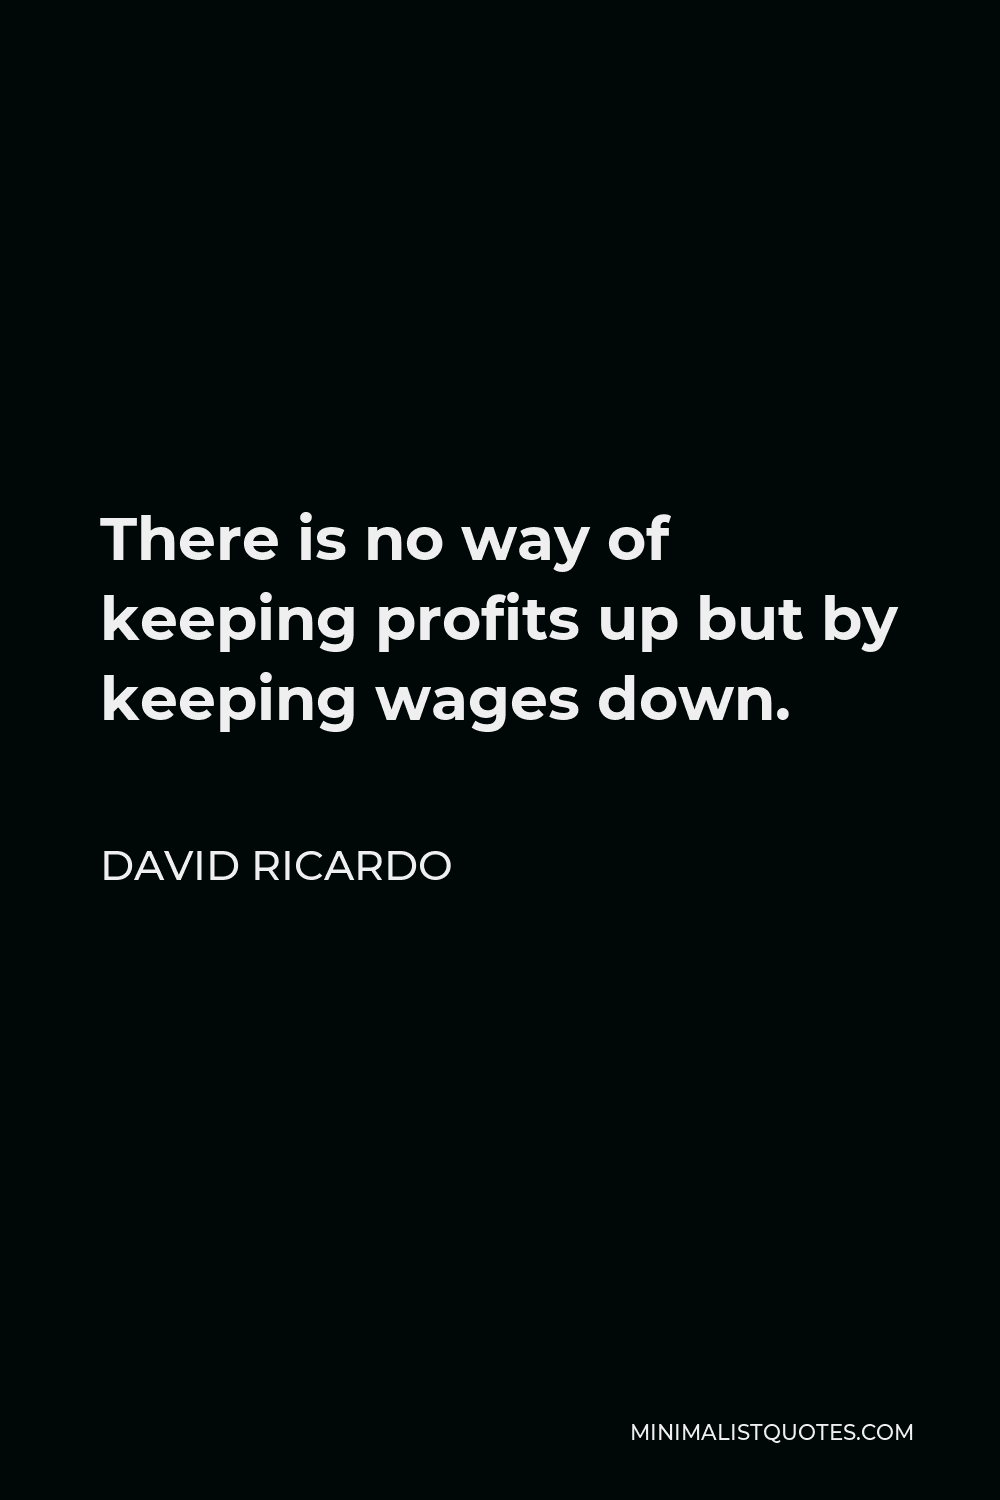 David Ricardo Quote - There is no way of keeping profits up but by keeping wages down.